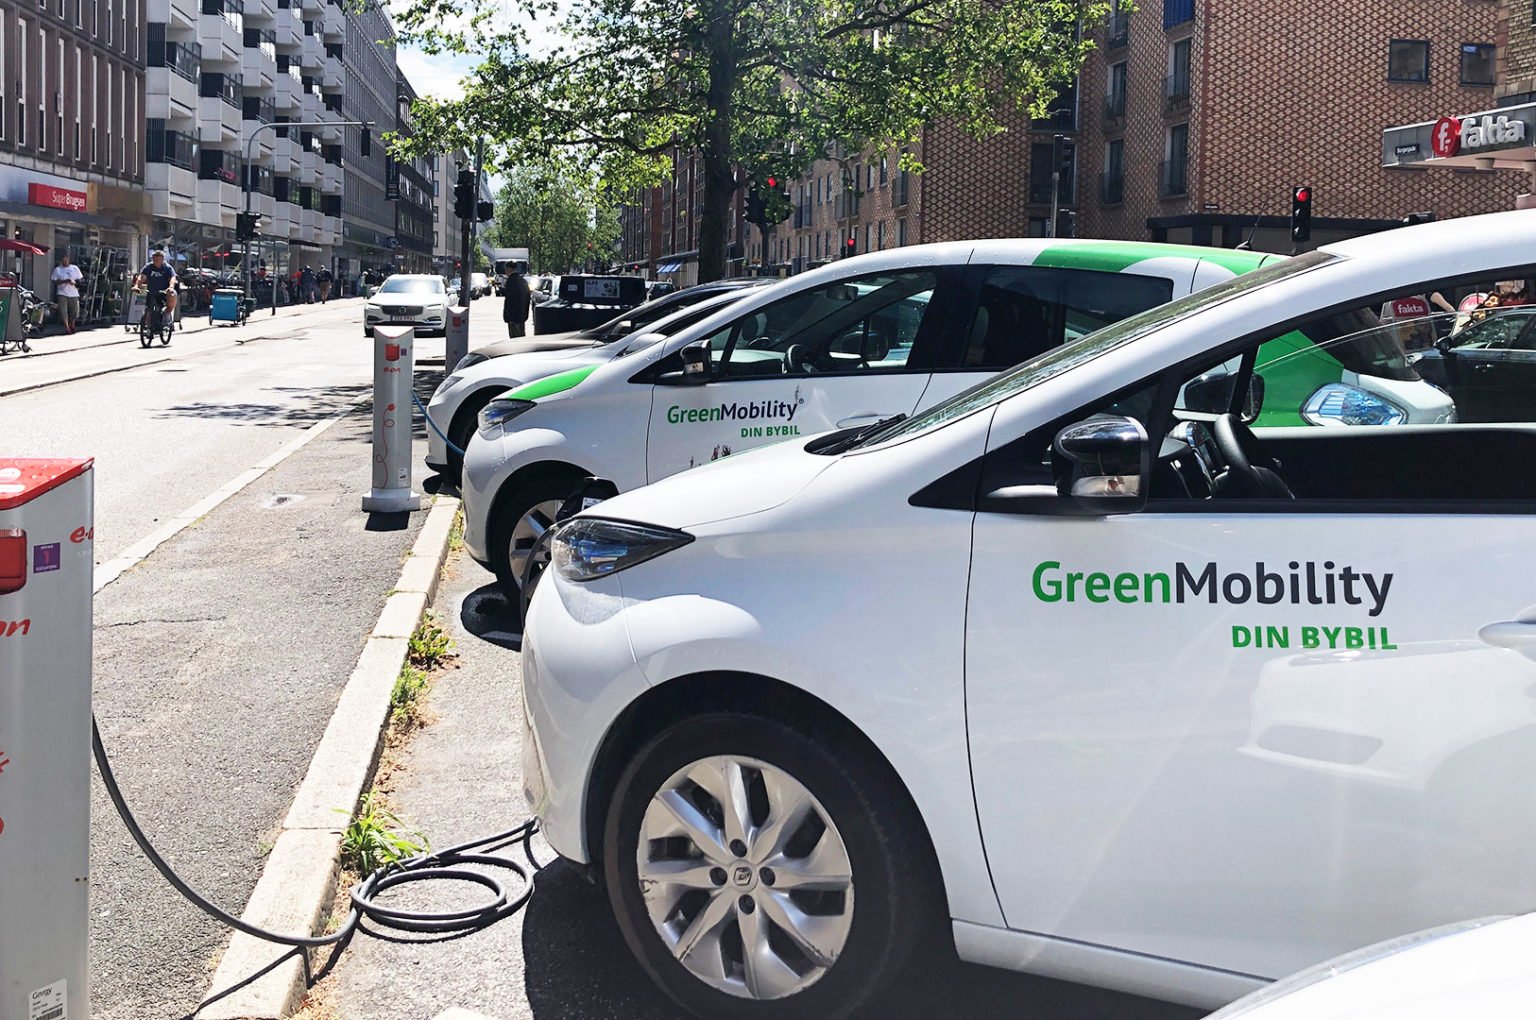 GreenMobility cars get charged